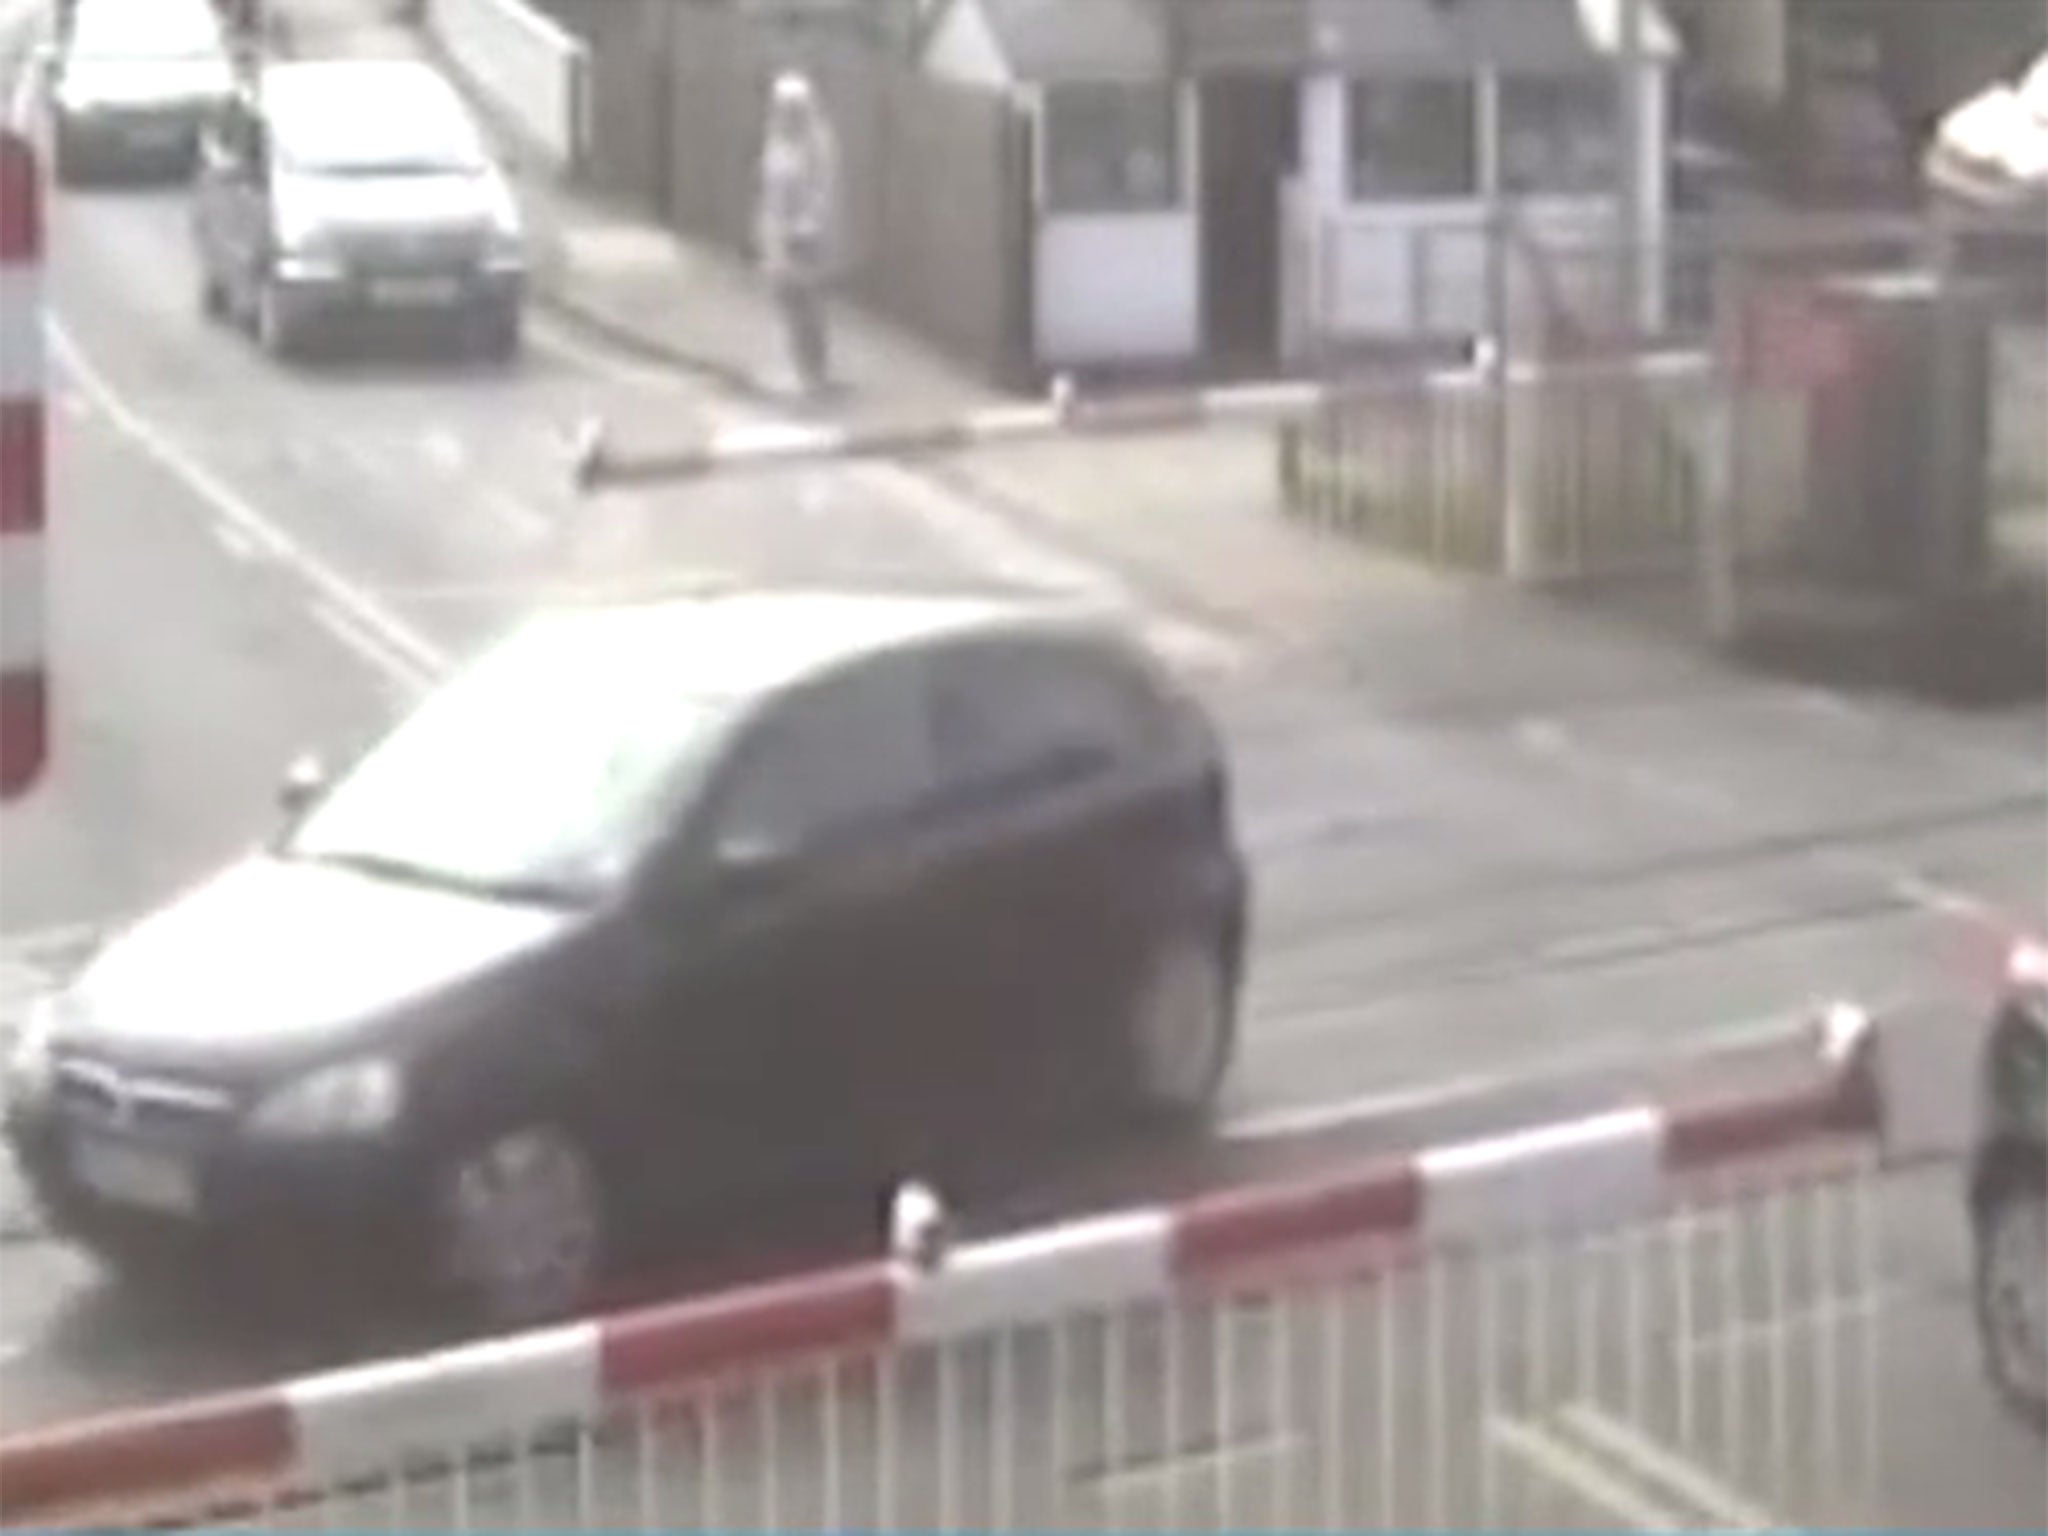 The videos were released on the British Transport Police's website today